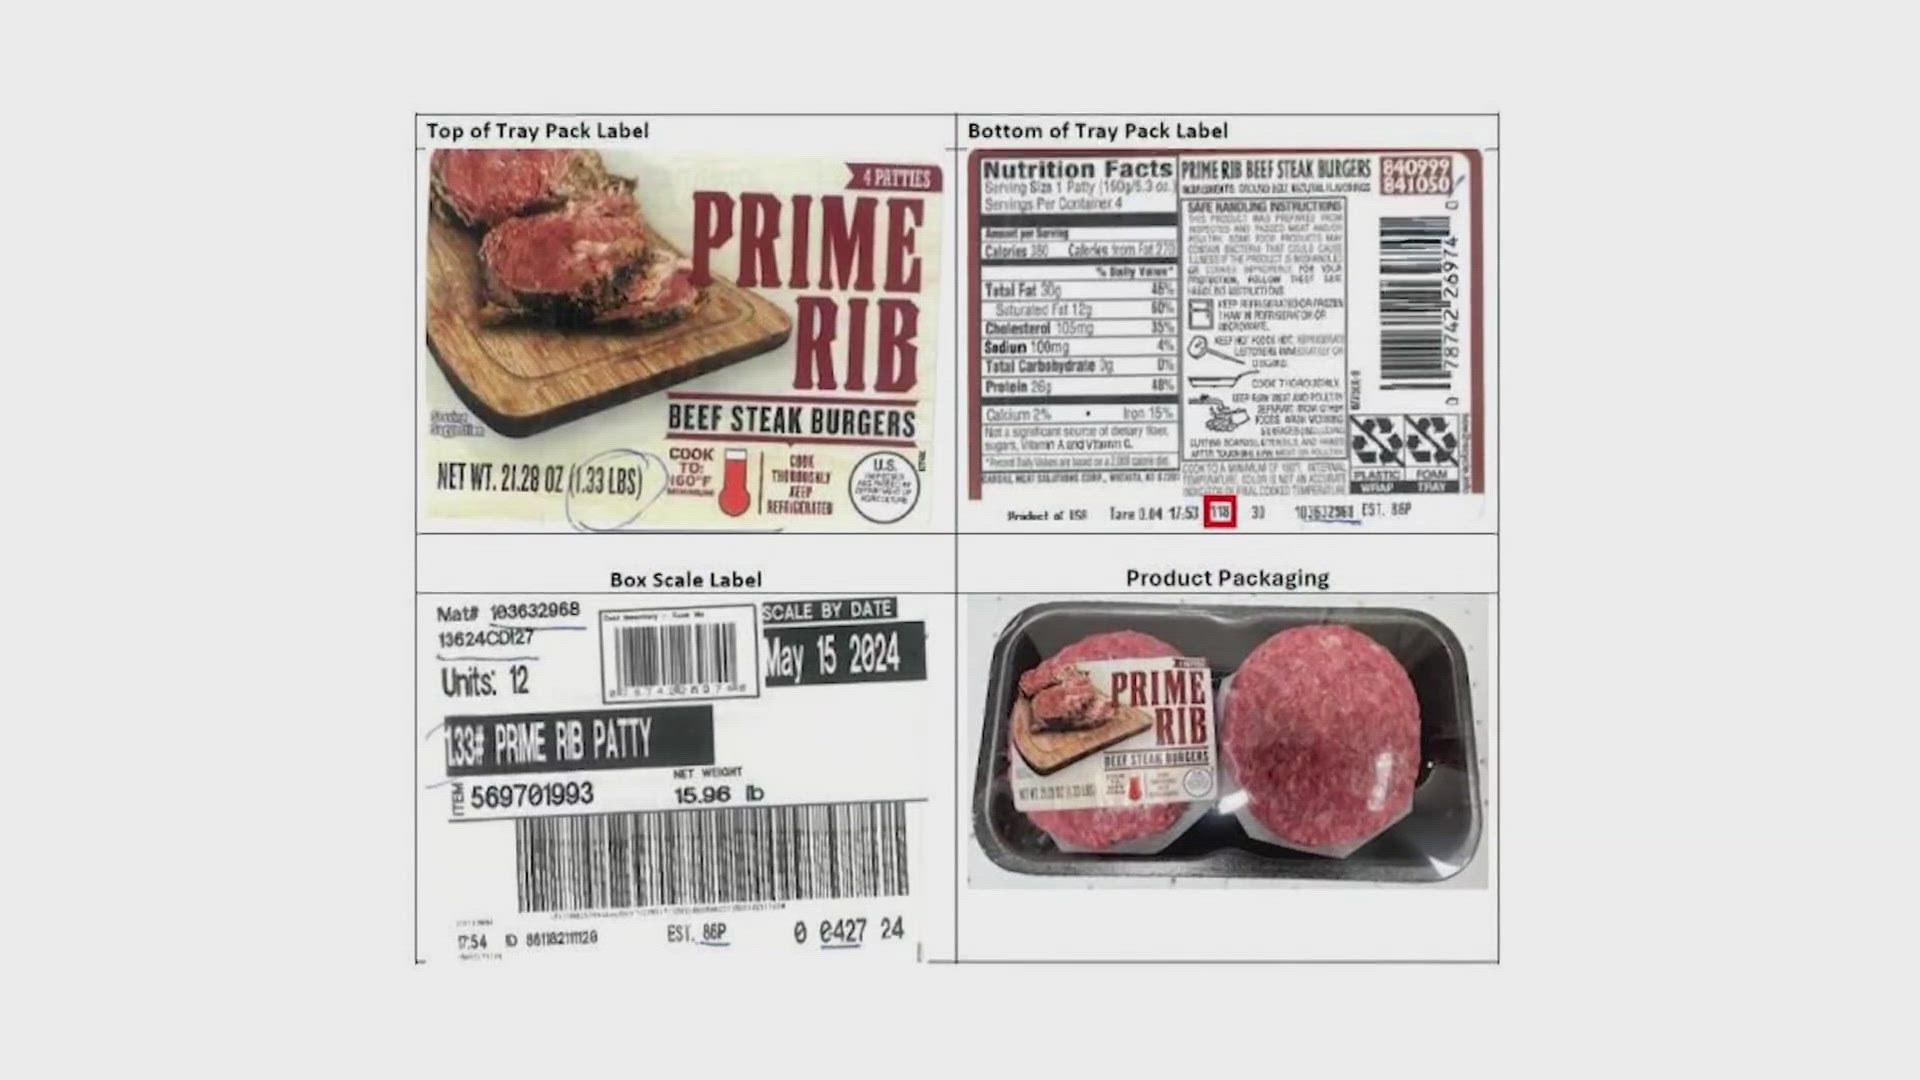 Over 16,000 pounds of Walmart ground beef have been recalled from stores across the country.